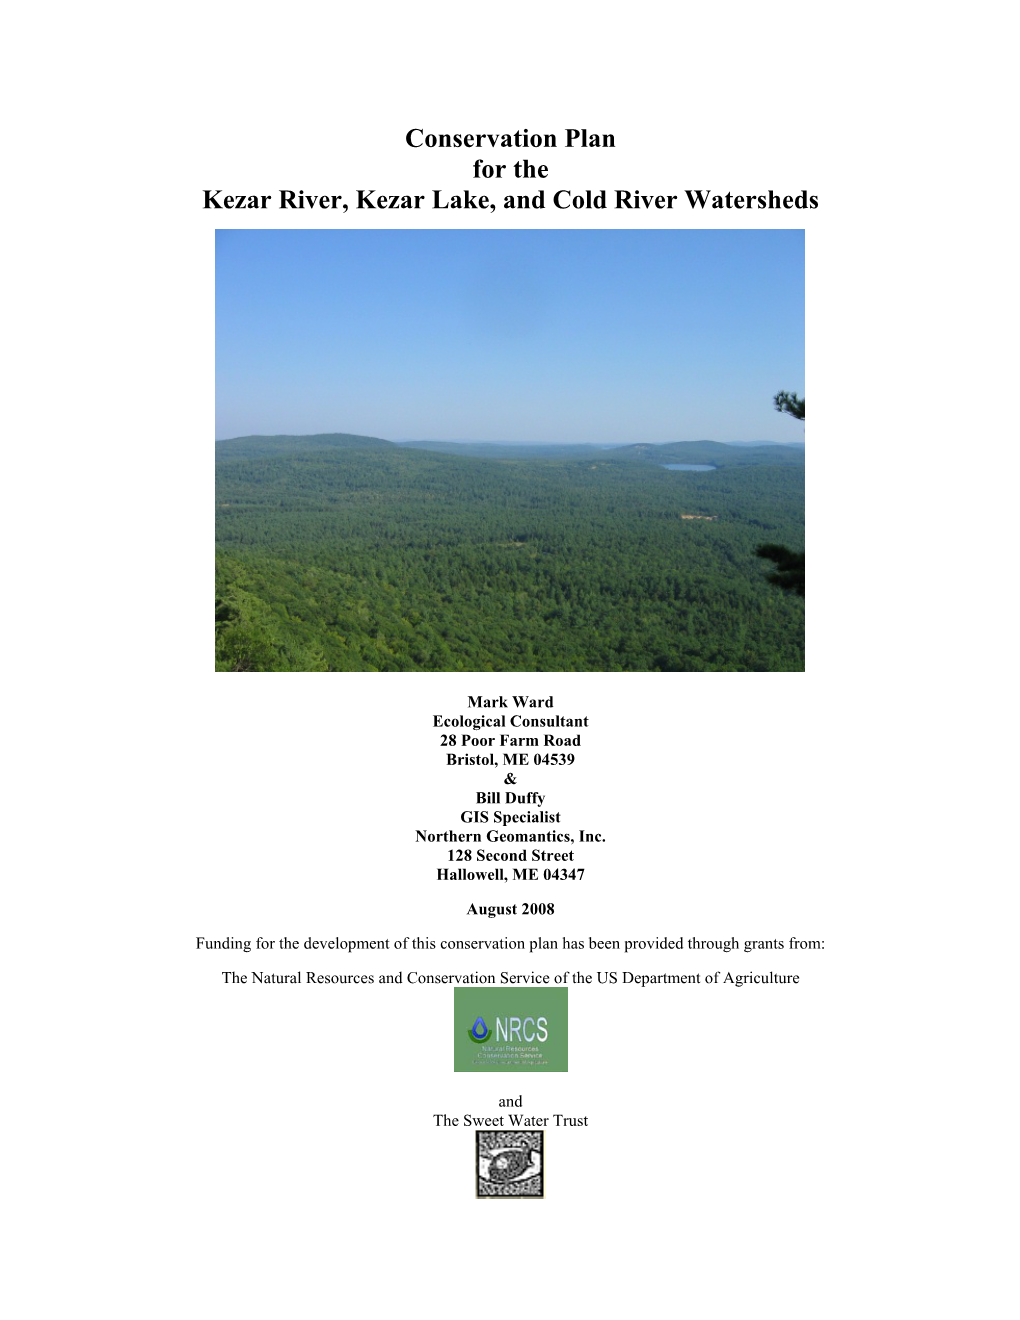 Conservation Plan for the Upper Saco River Watershed